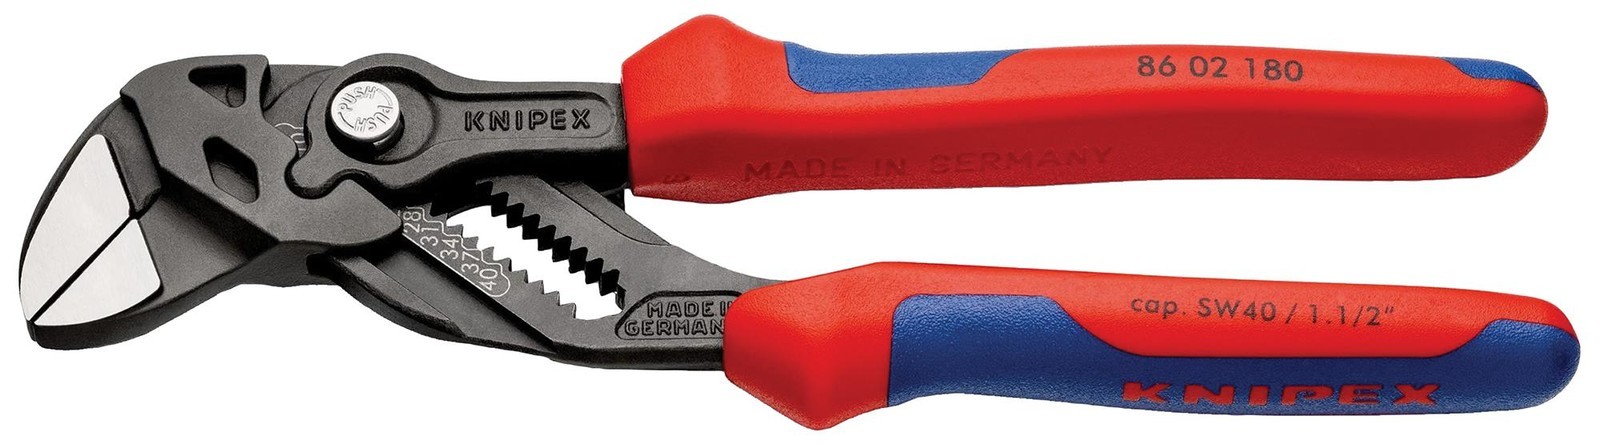 Knipex 86 02 180 Plier Wrench, Water Pump, 180mm